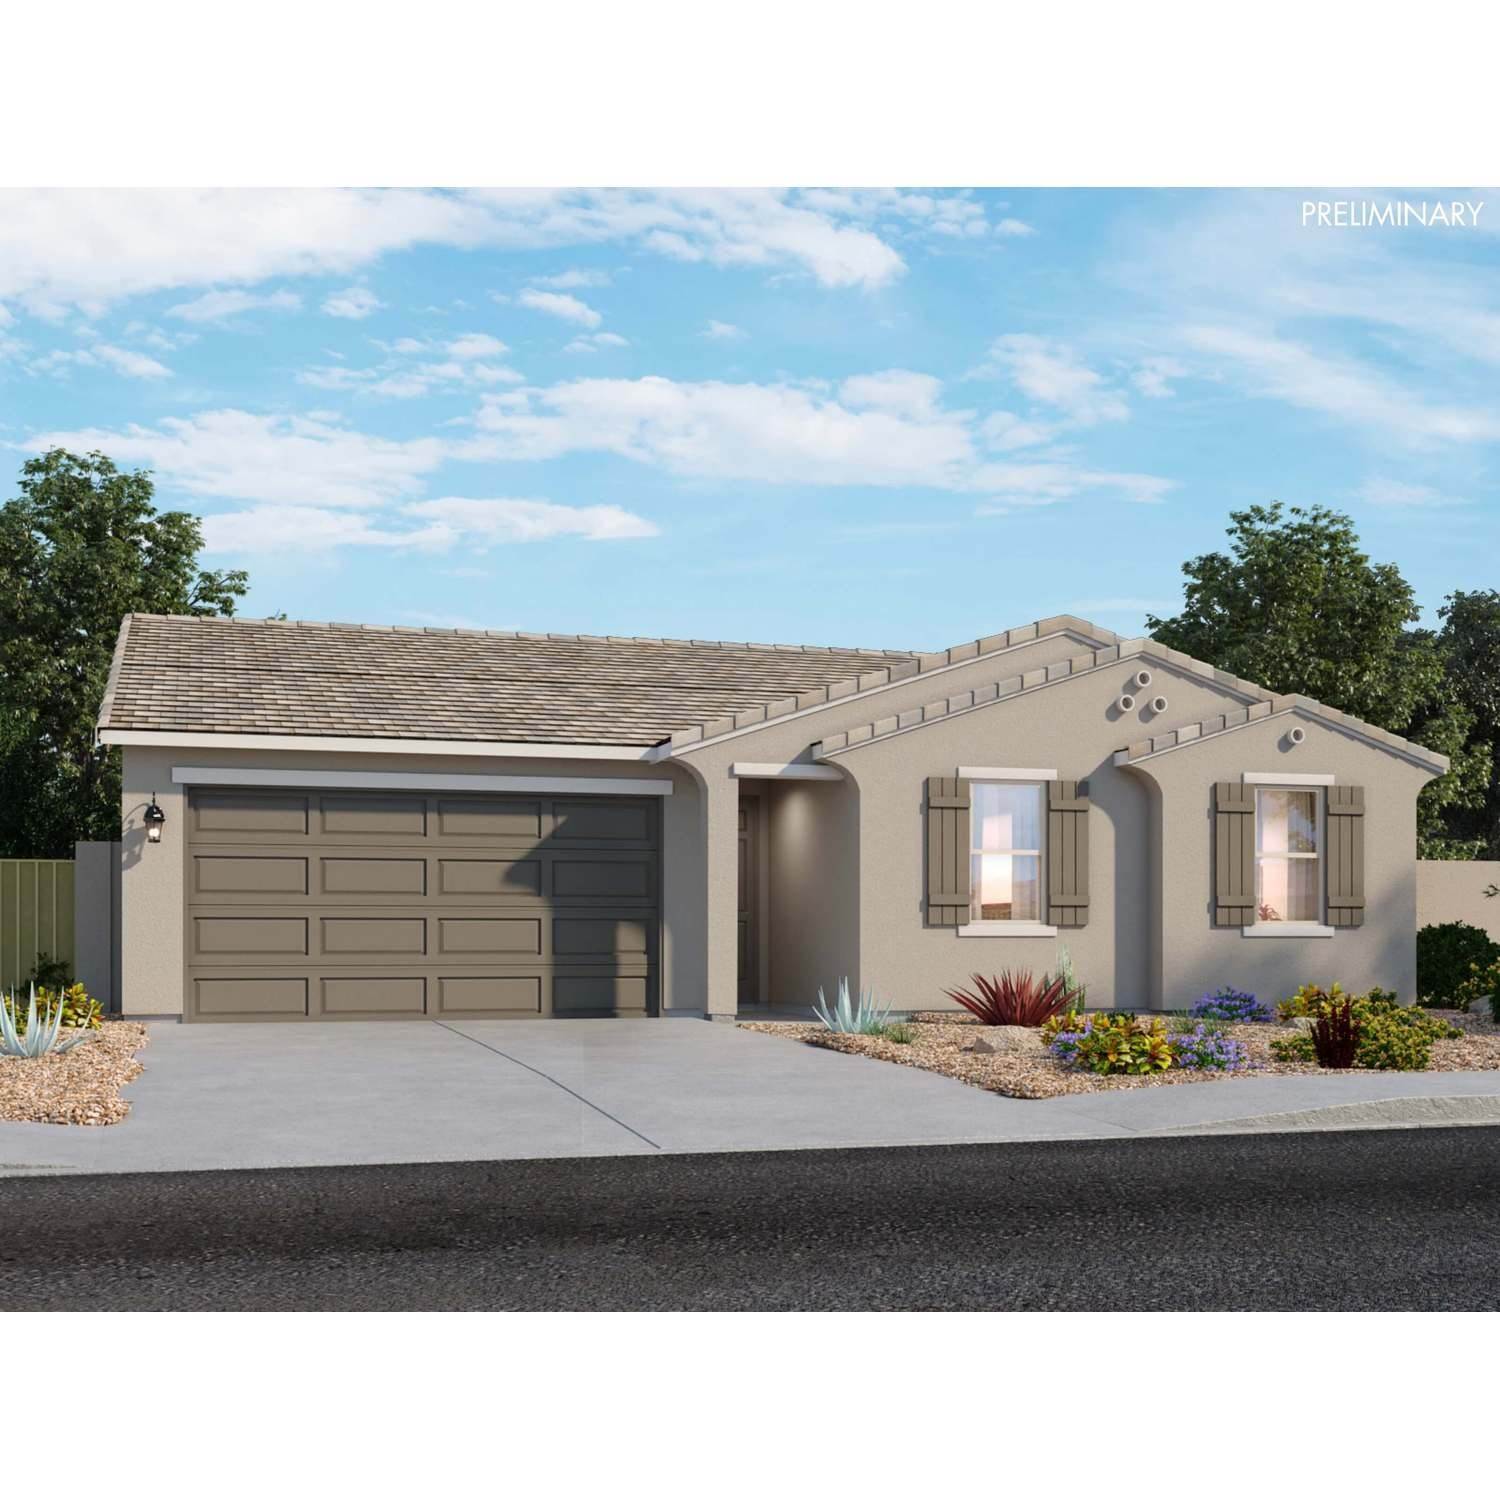 Single Family for Sale at Laveen, AZ 85339